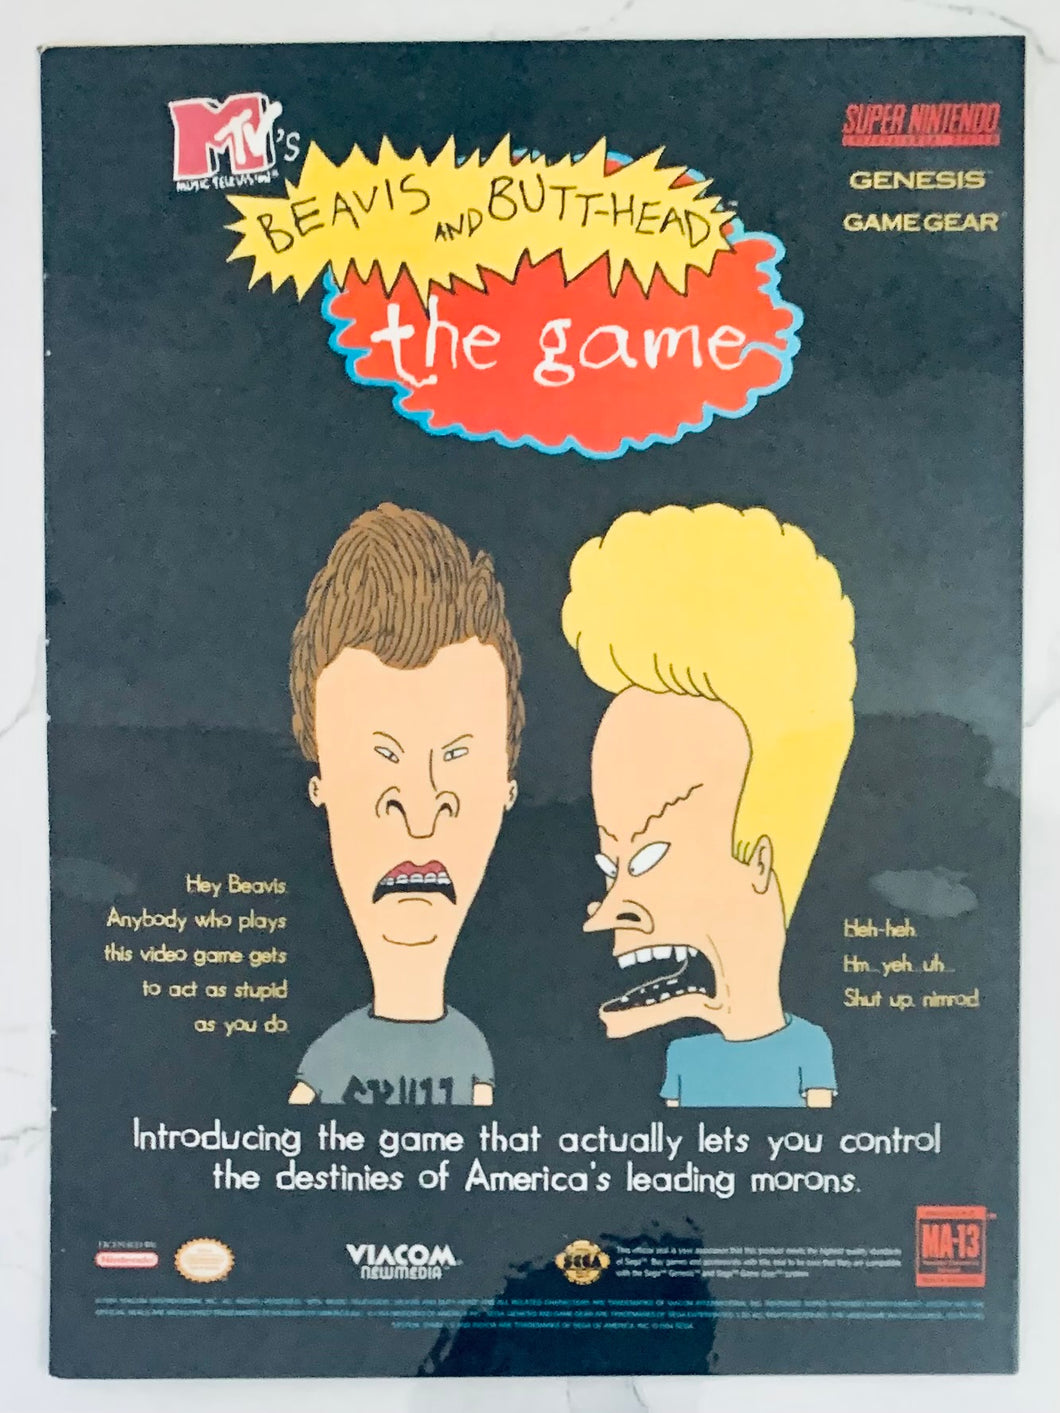 Beavis and Butt-Head The Game - SNES / Genesis - Original Vintage Advertisement - Print Ads - Laminated A4 Poster